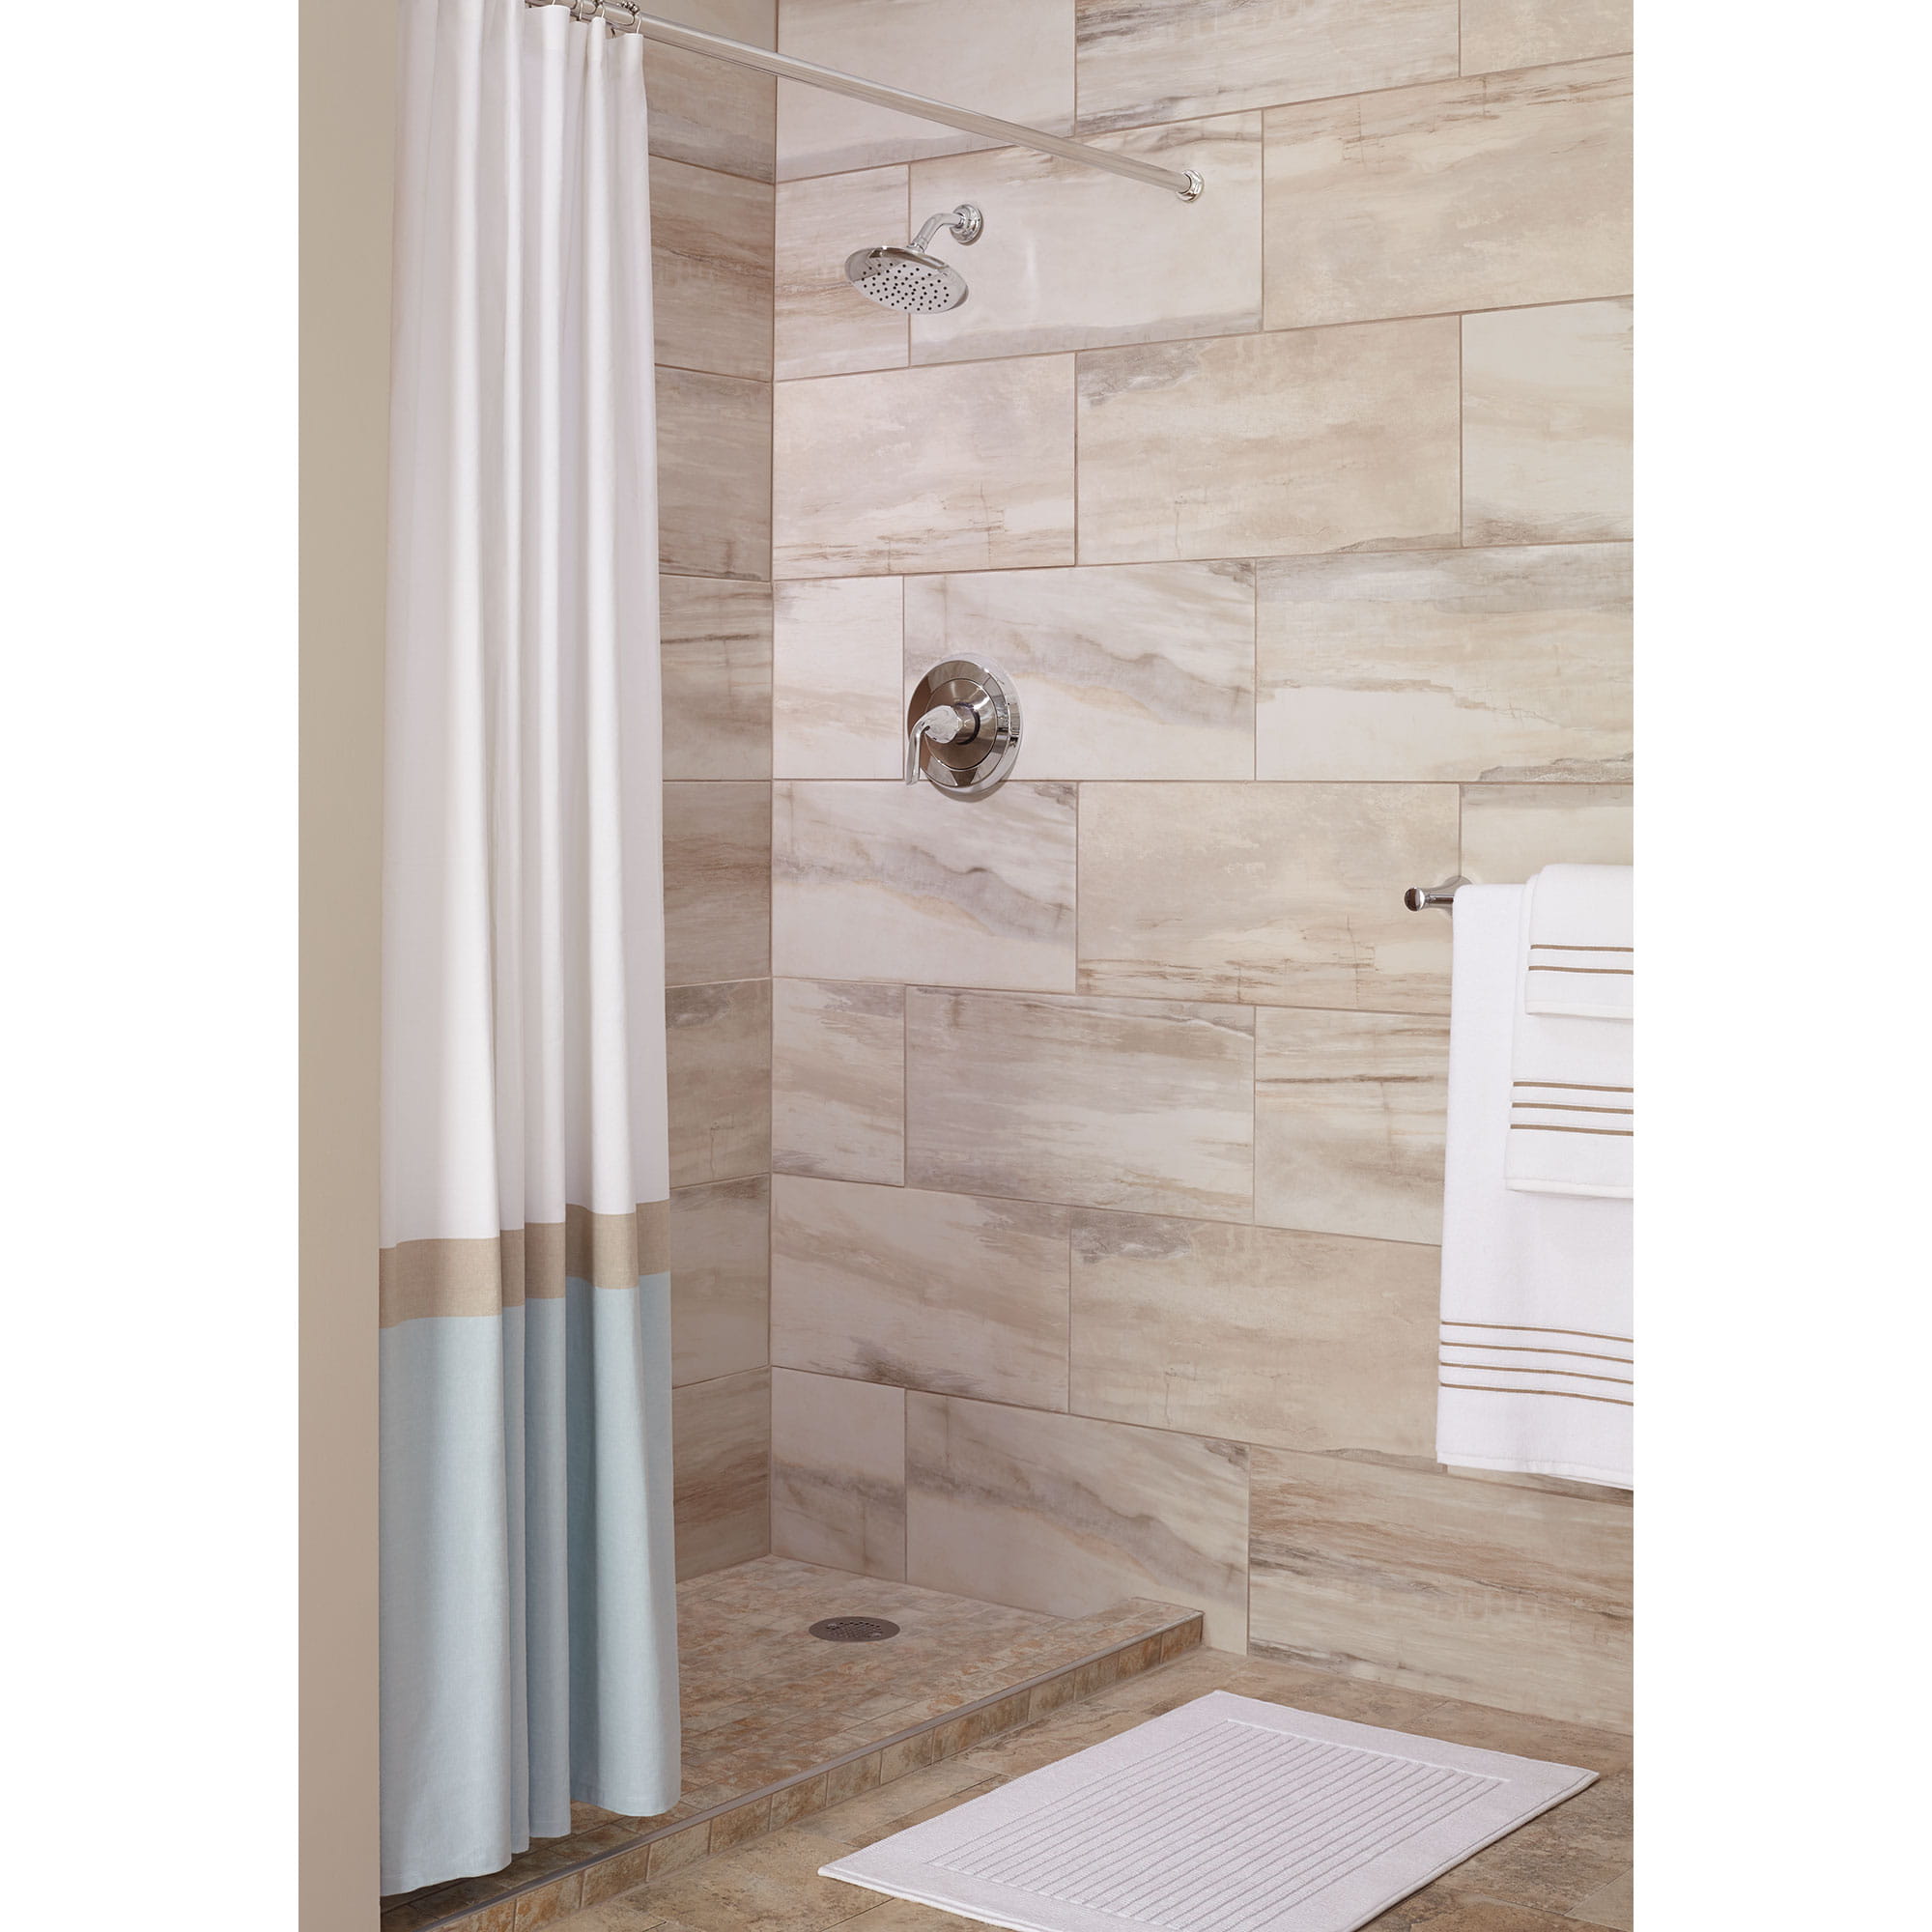 Fluent 25 GPM Shower Trim Kit with Lever Handle CHROME